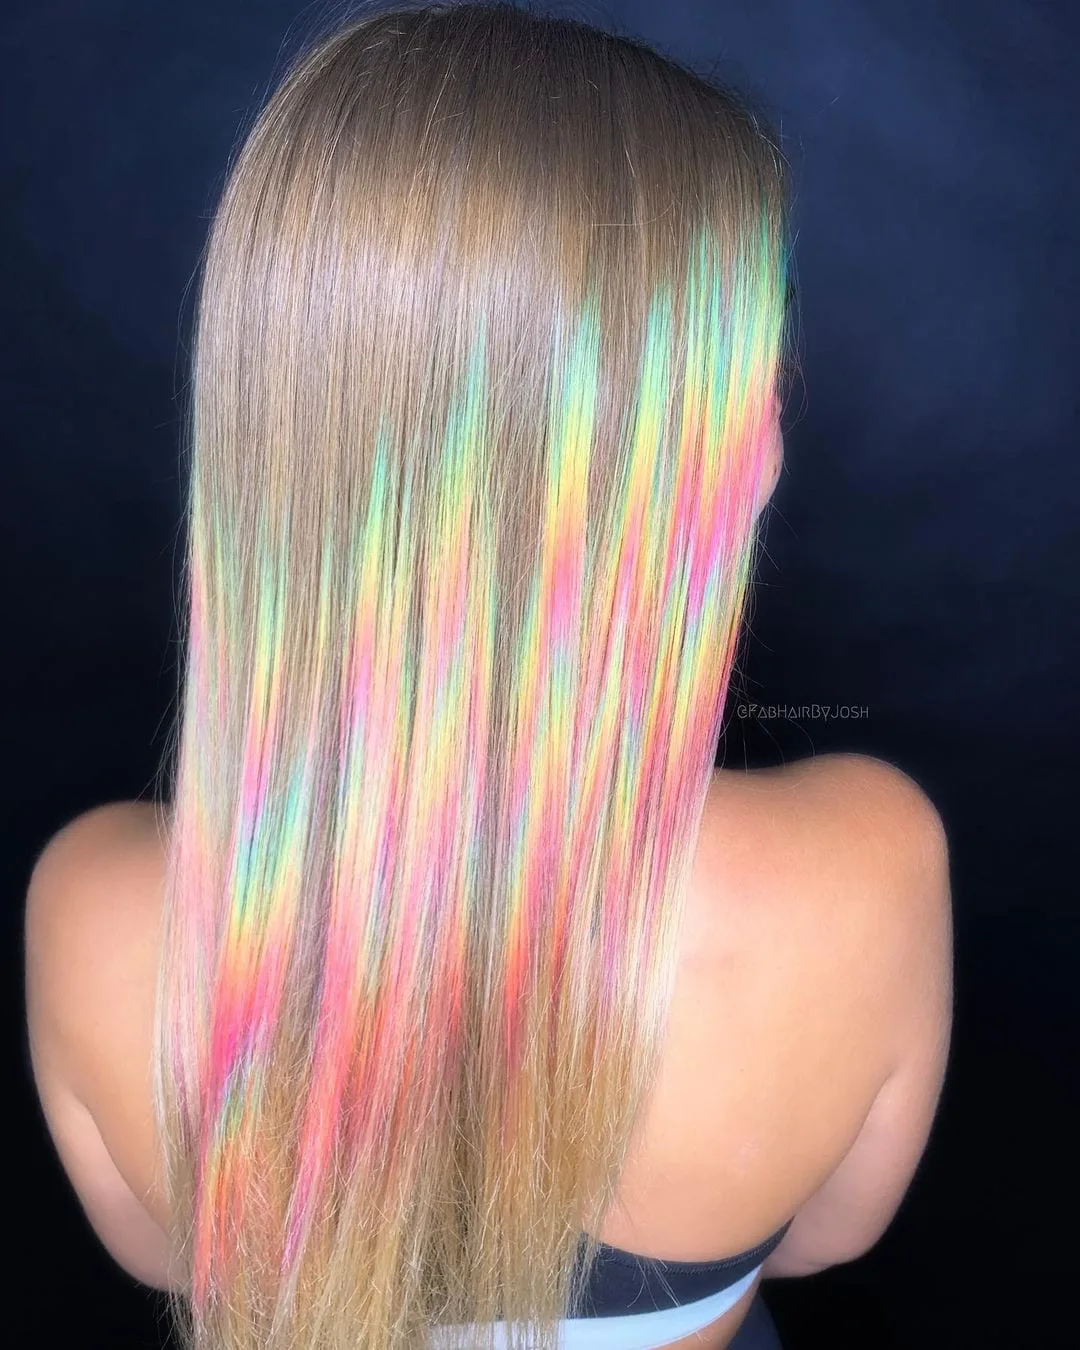 Holographic hair on blonde woman in a sports bra